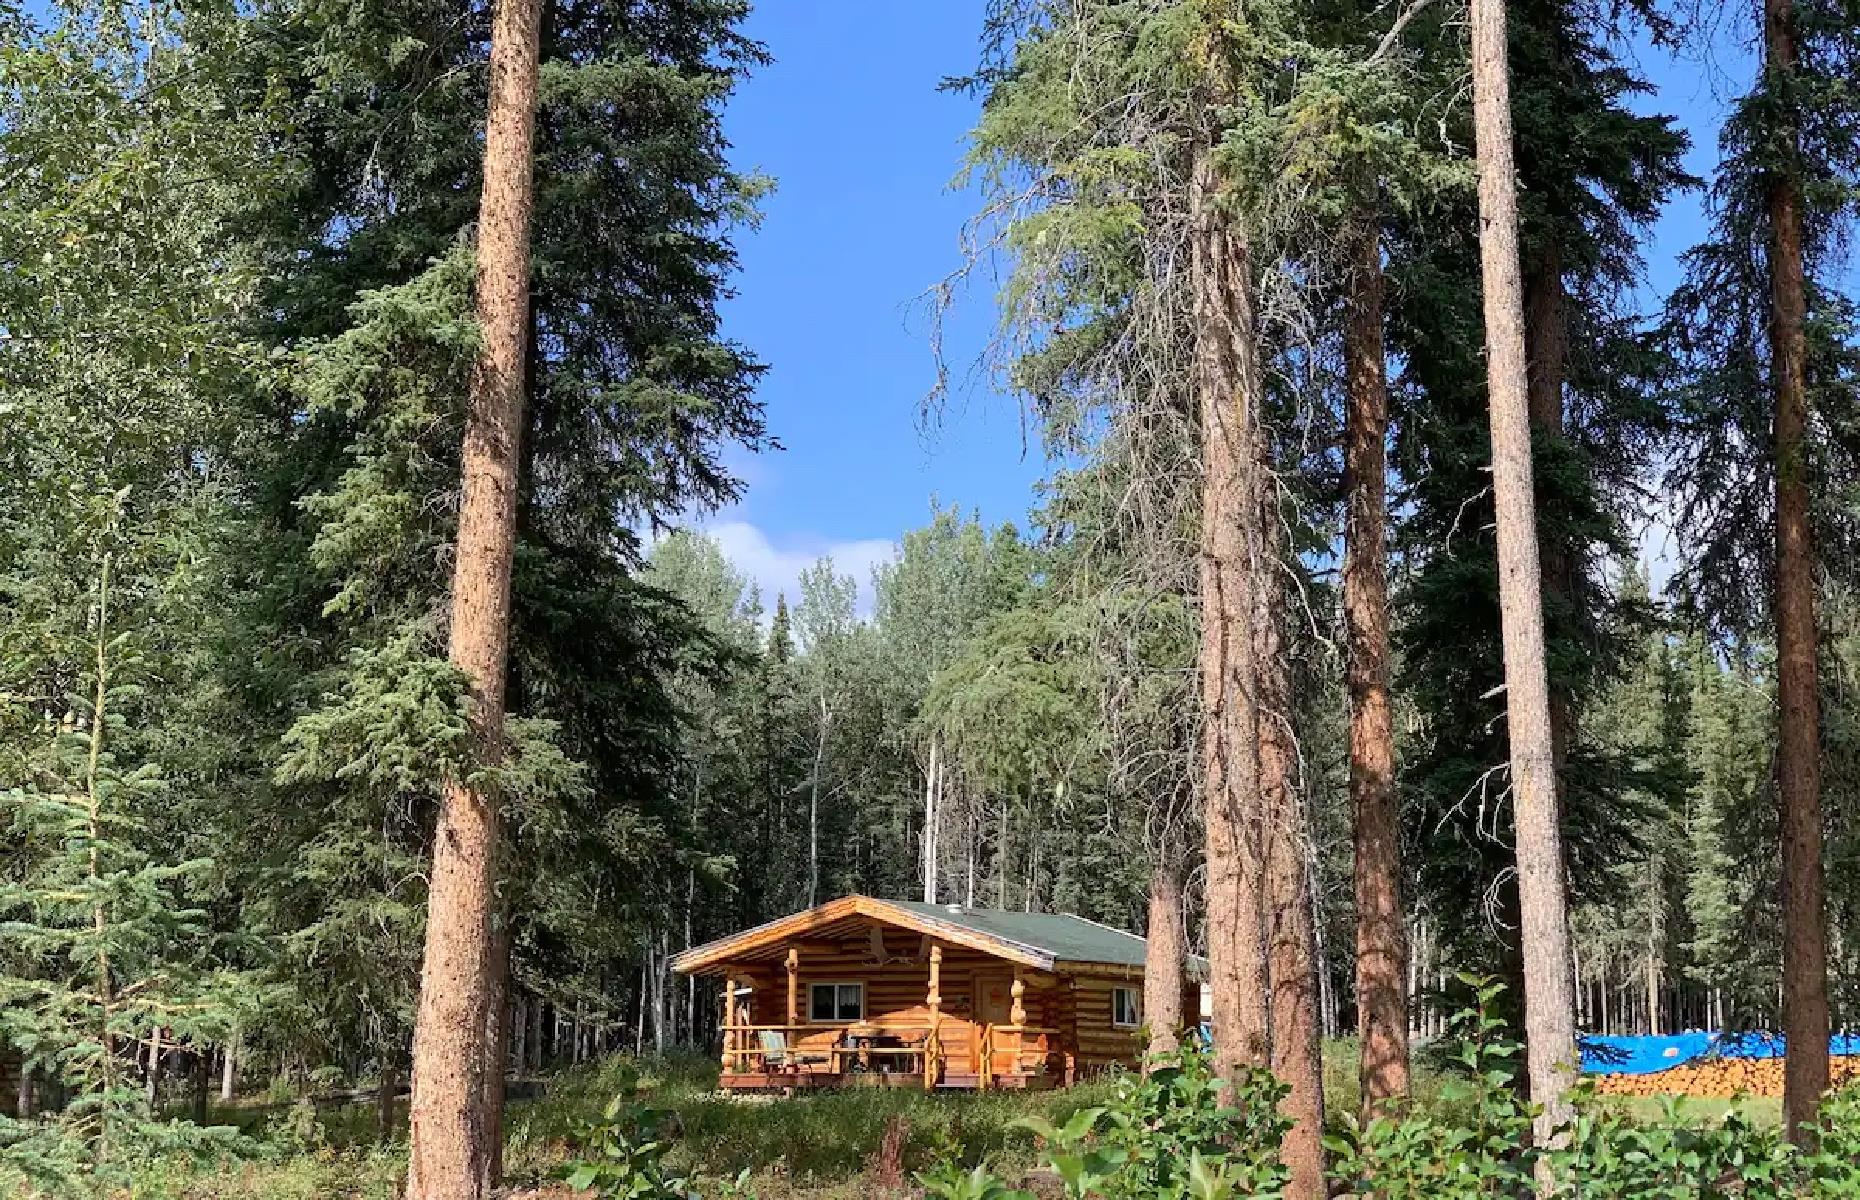 <p>Explore the romance of Yukon and get completely off-grid at this <a href="https://www.airbnb.co.uk/rooms/35161052?adults=1&category_tag=Tag%3A5348&children=0&infants=0&check_in=2022-09-29&check_out=2022-10-04&federated_search_id=9fa103a8-692d-4de4-8802-67151d9df99e&source_impression_id=p3_1662925995_kTktFE0EqI%2FhLHN5">classic wood cabin</a>, near the town of Faro, not far from a now-abandoned mineral mine. Surrounded by 10 acres of sky-high forest, the cabin has a true middle-of-nowhere feel in its spot near the Magundy River. Available year-round, up to three guests can cosy up inside between hikes or snowshoe trips along forest trails. You may even see the Northern Lights and try ice fishing during the winter.</p>